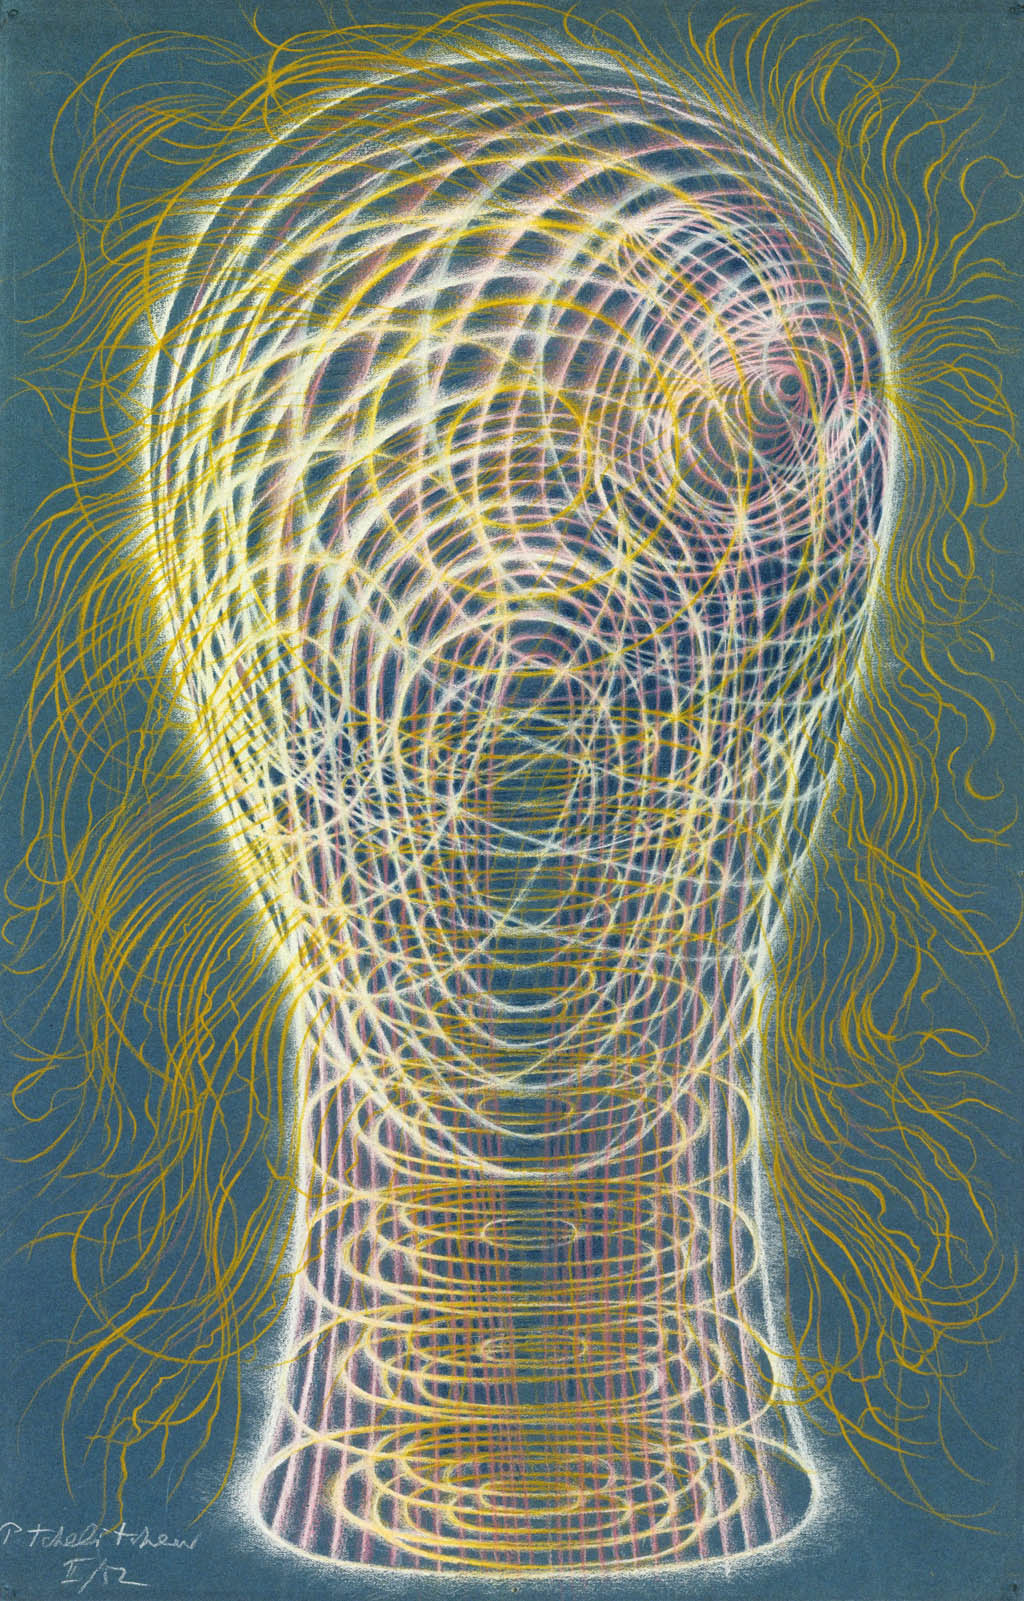 Pavel Tchelitchew - Spiral Head with Hair - 1952 pastel on blue paper